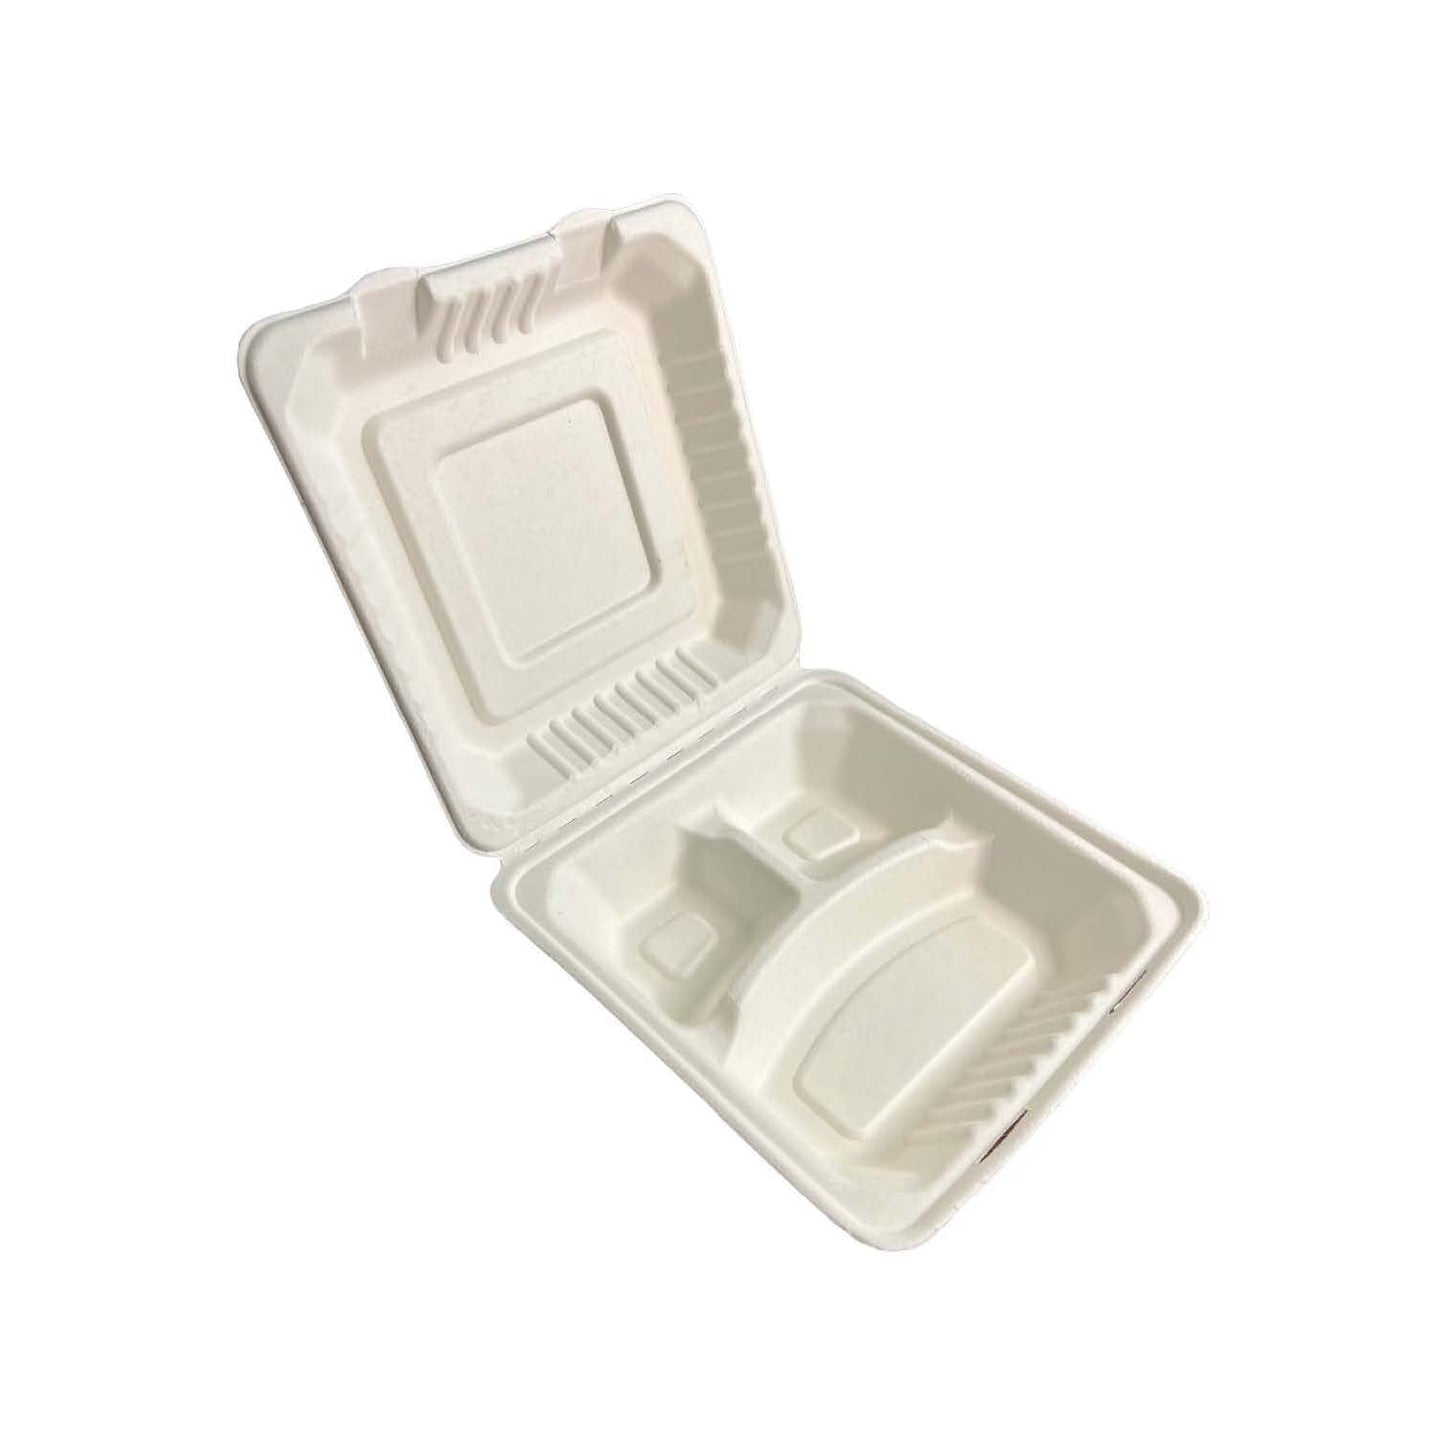 8x8 - 3 compartment Ecoware Clamshell